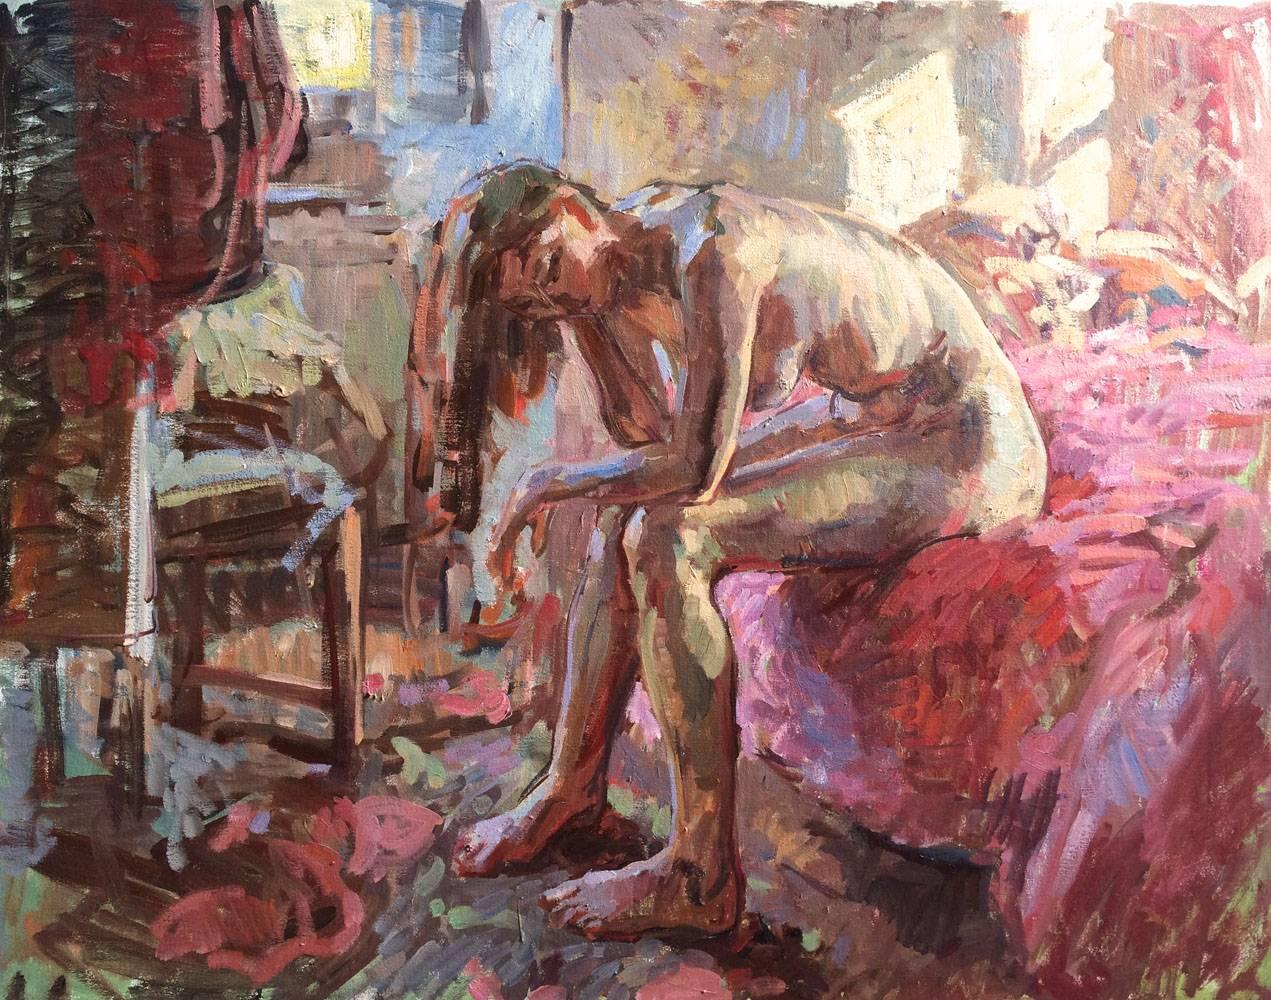 "Sitting Nude, Bea" 2016 oil painting of nude woman seated in thought, pink hues